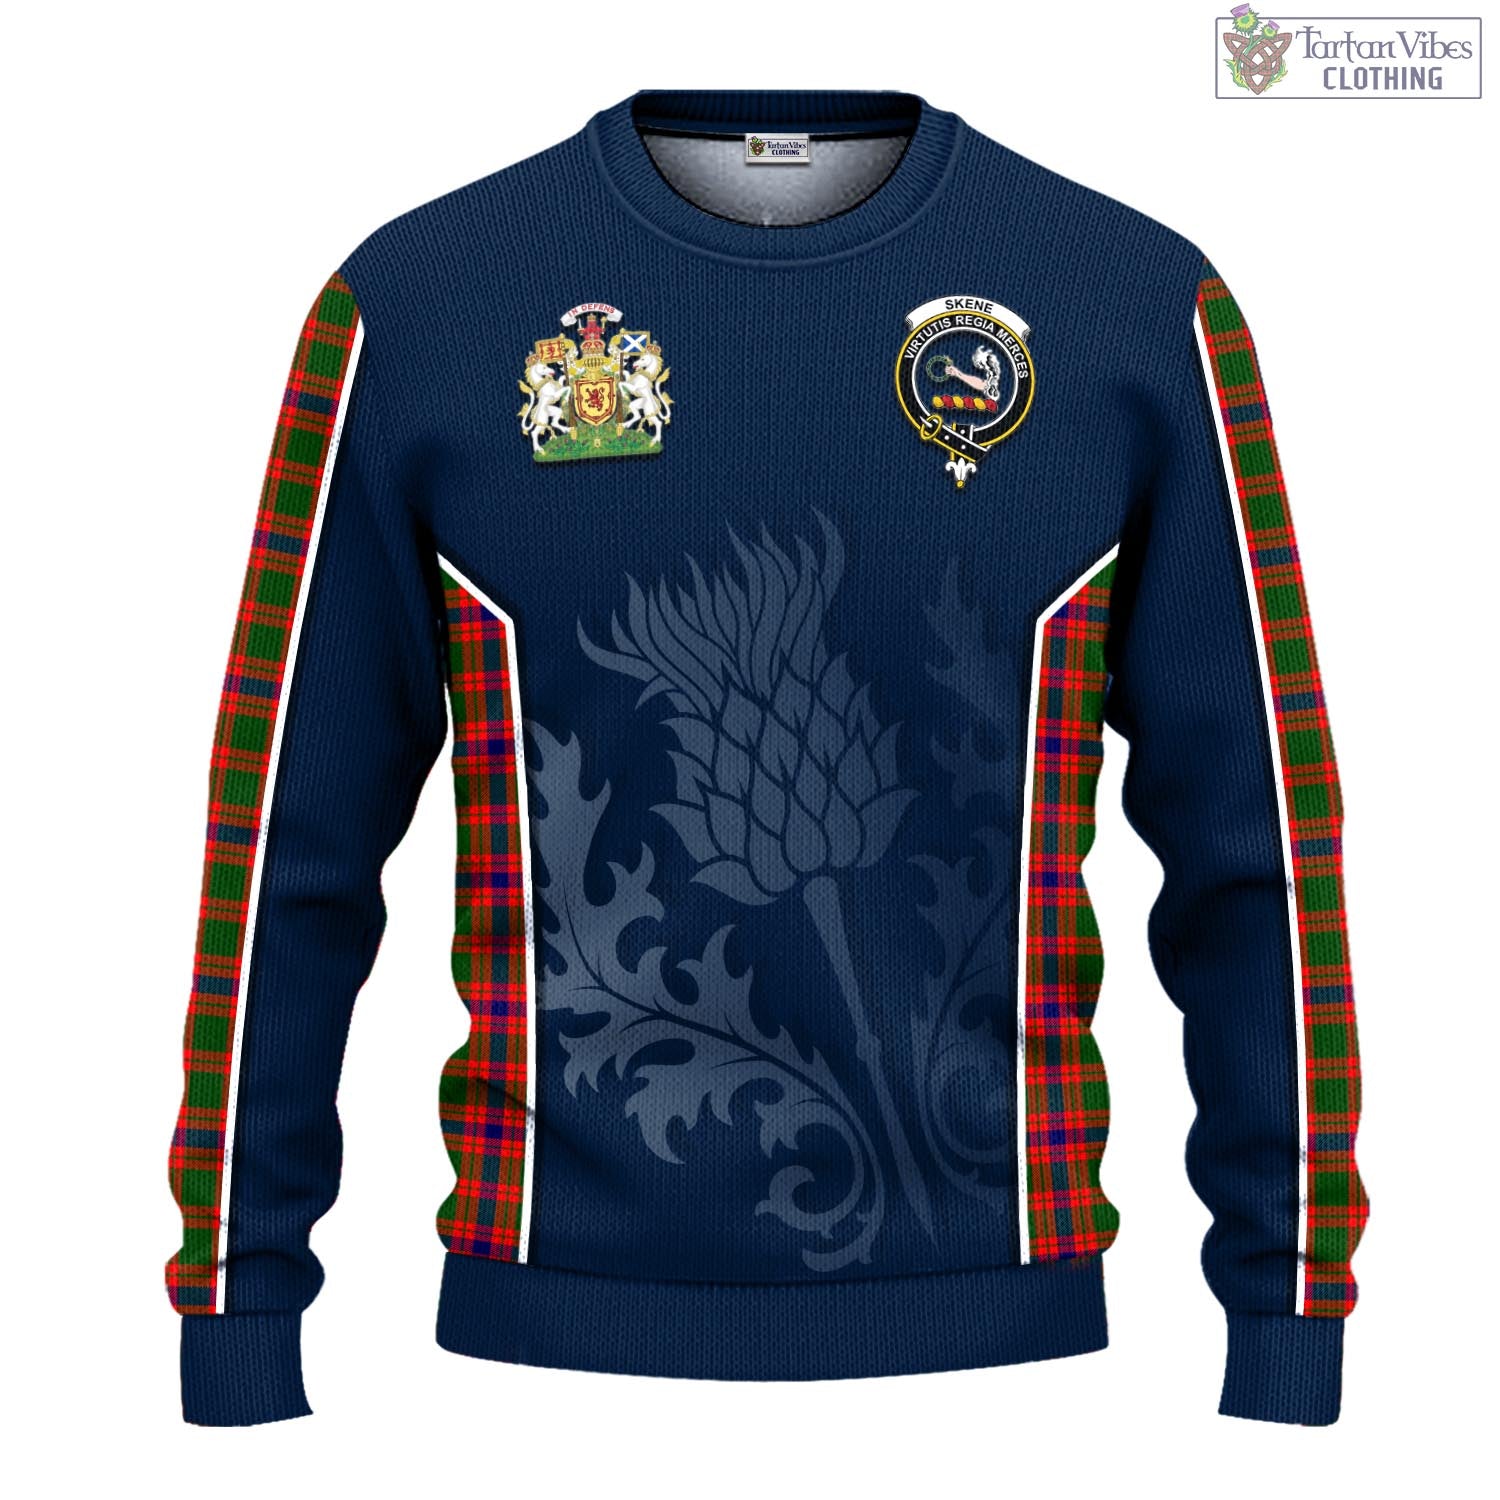 Tartan Vibes Clothing Skene Modern Tartan Knitted Sweatshirt with Family Crest and Scottish Thistle Vibes Sport Style